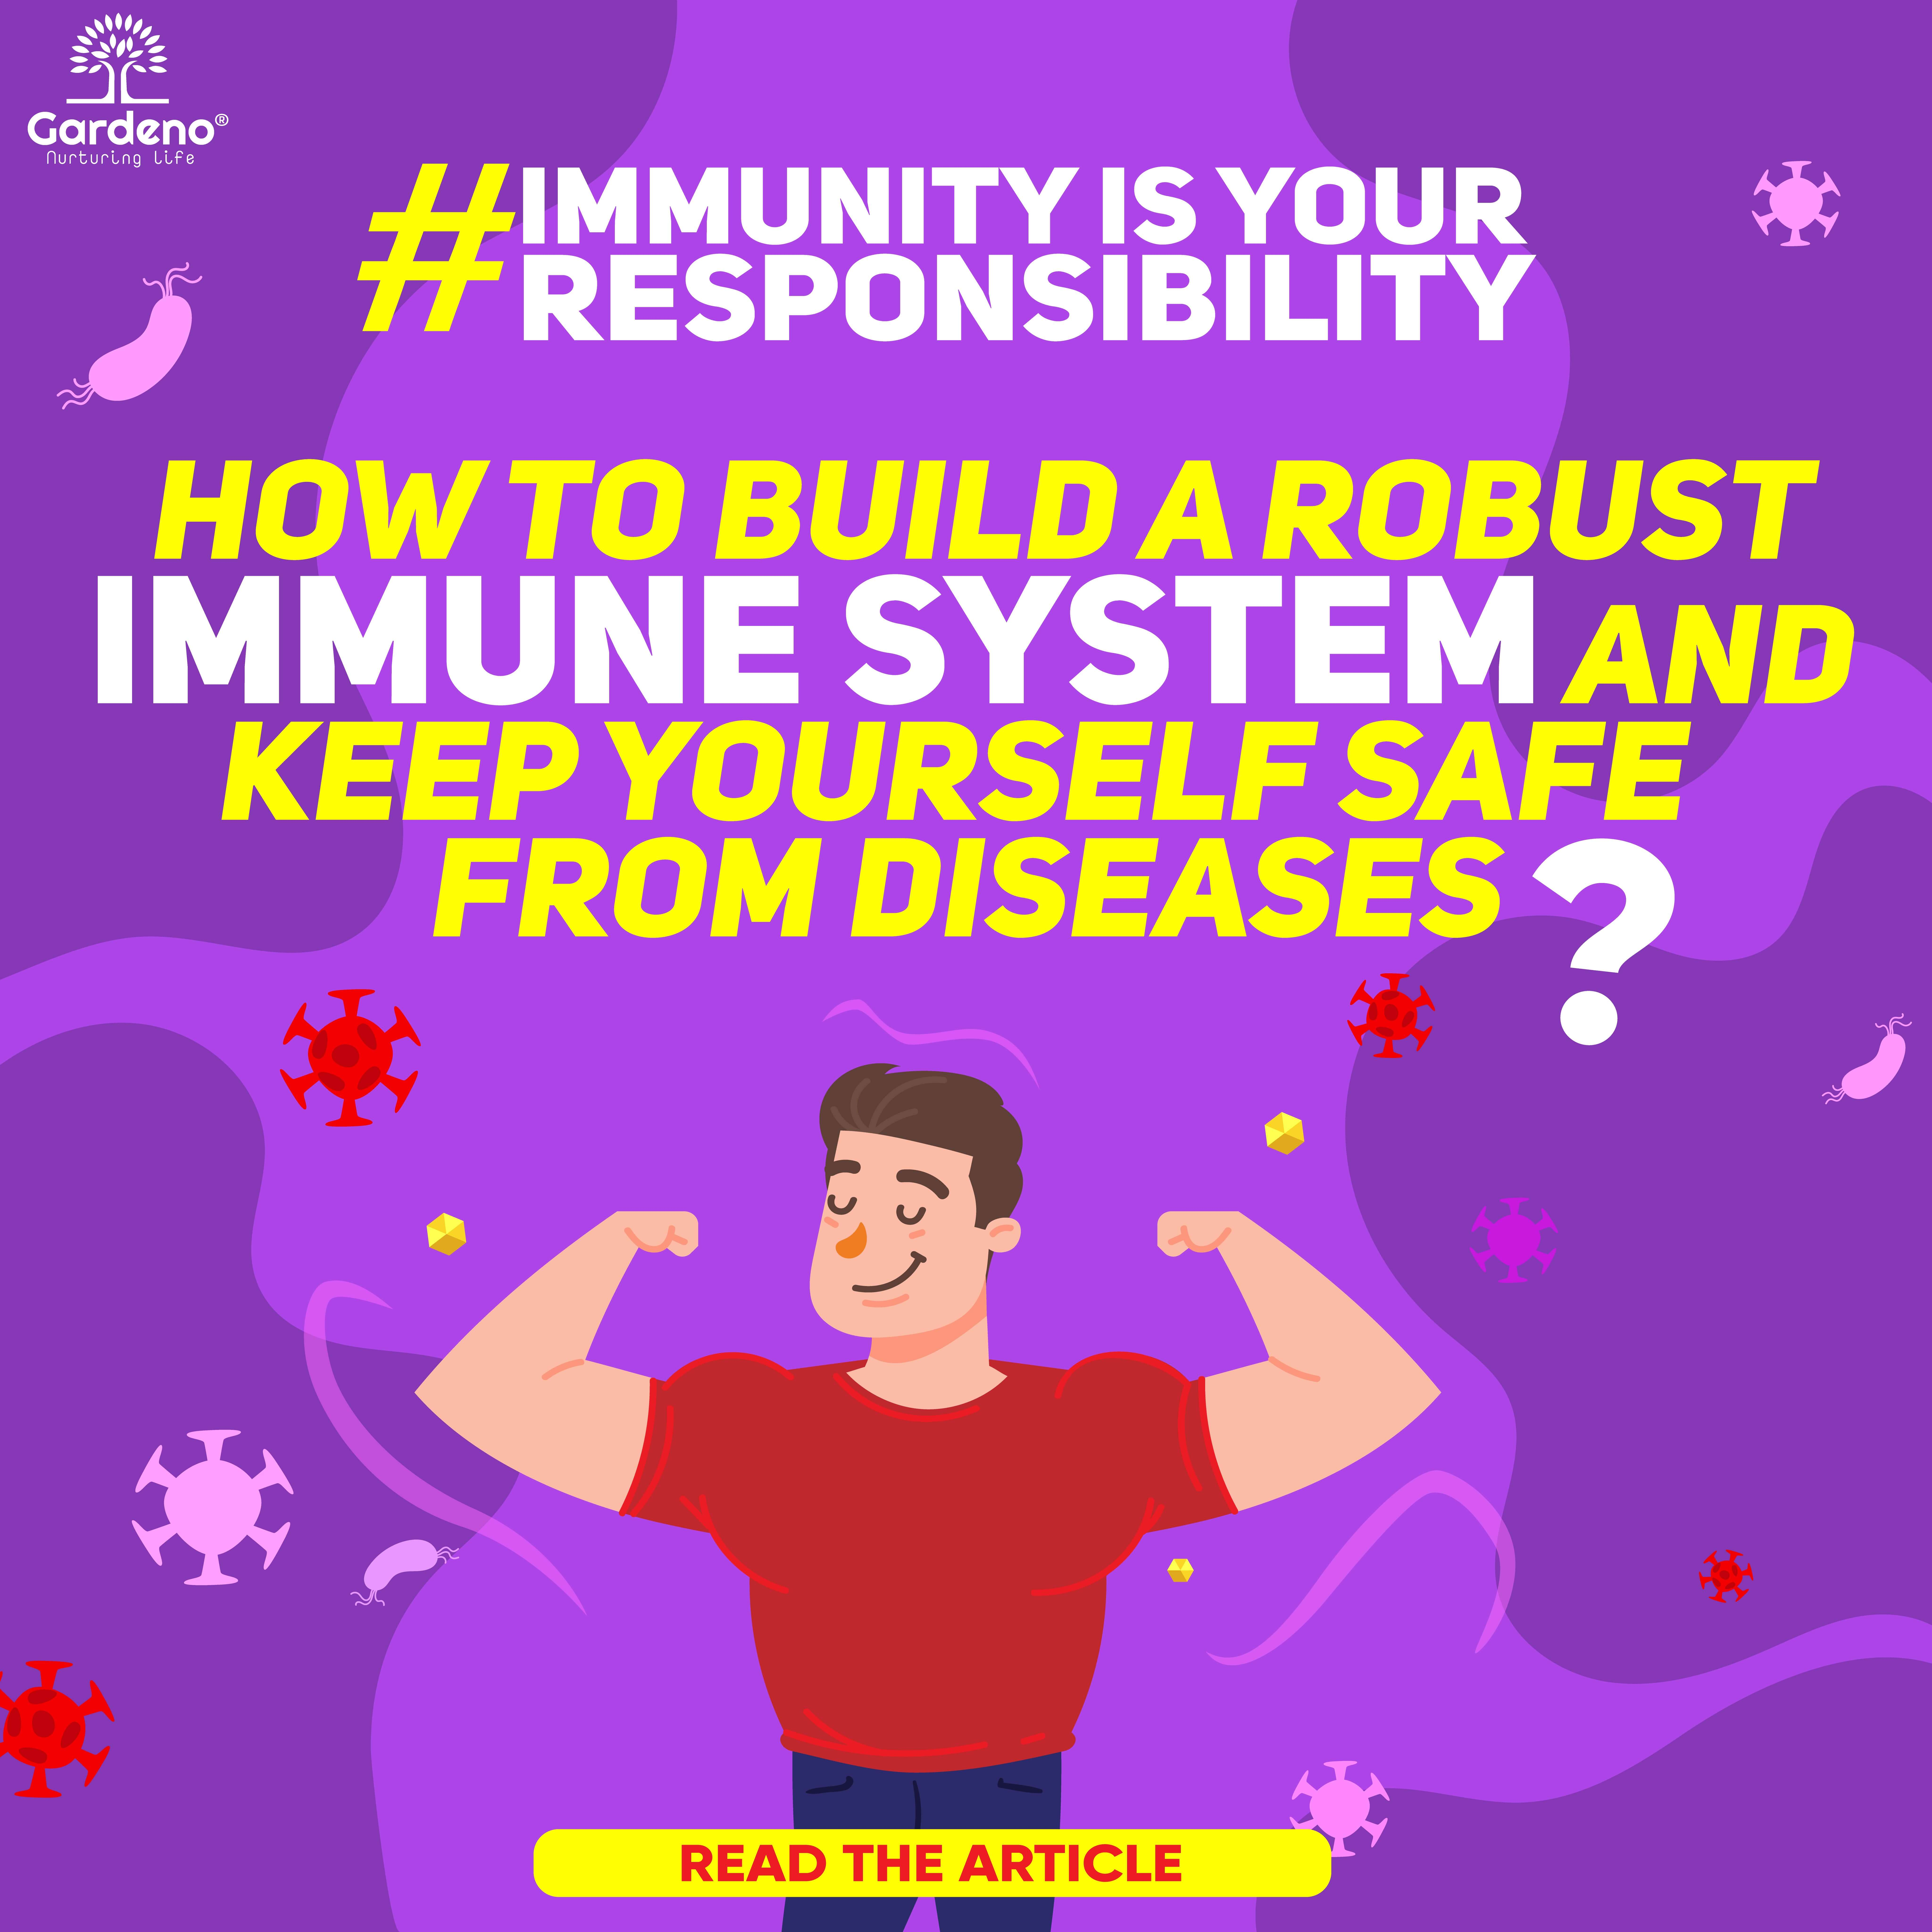 How to build a robust immune system and keep yourself safe from diseases